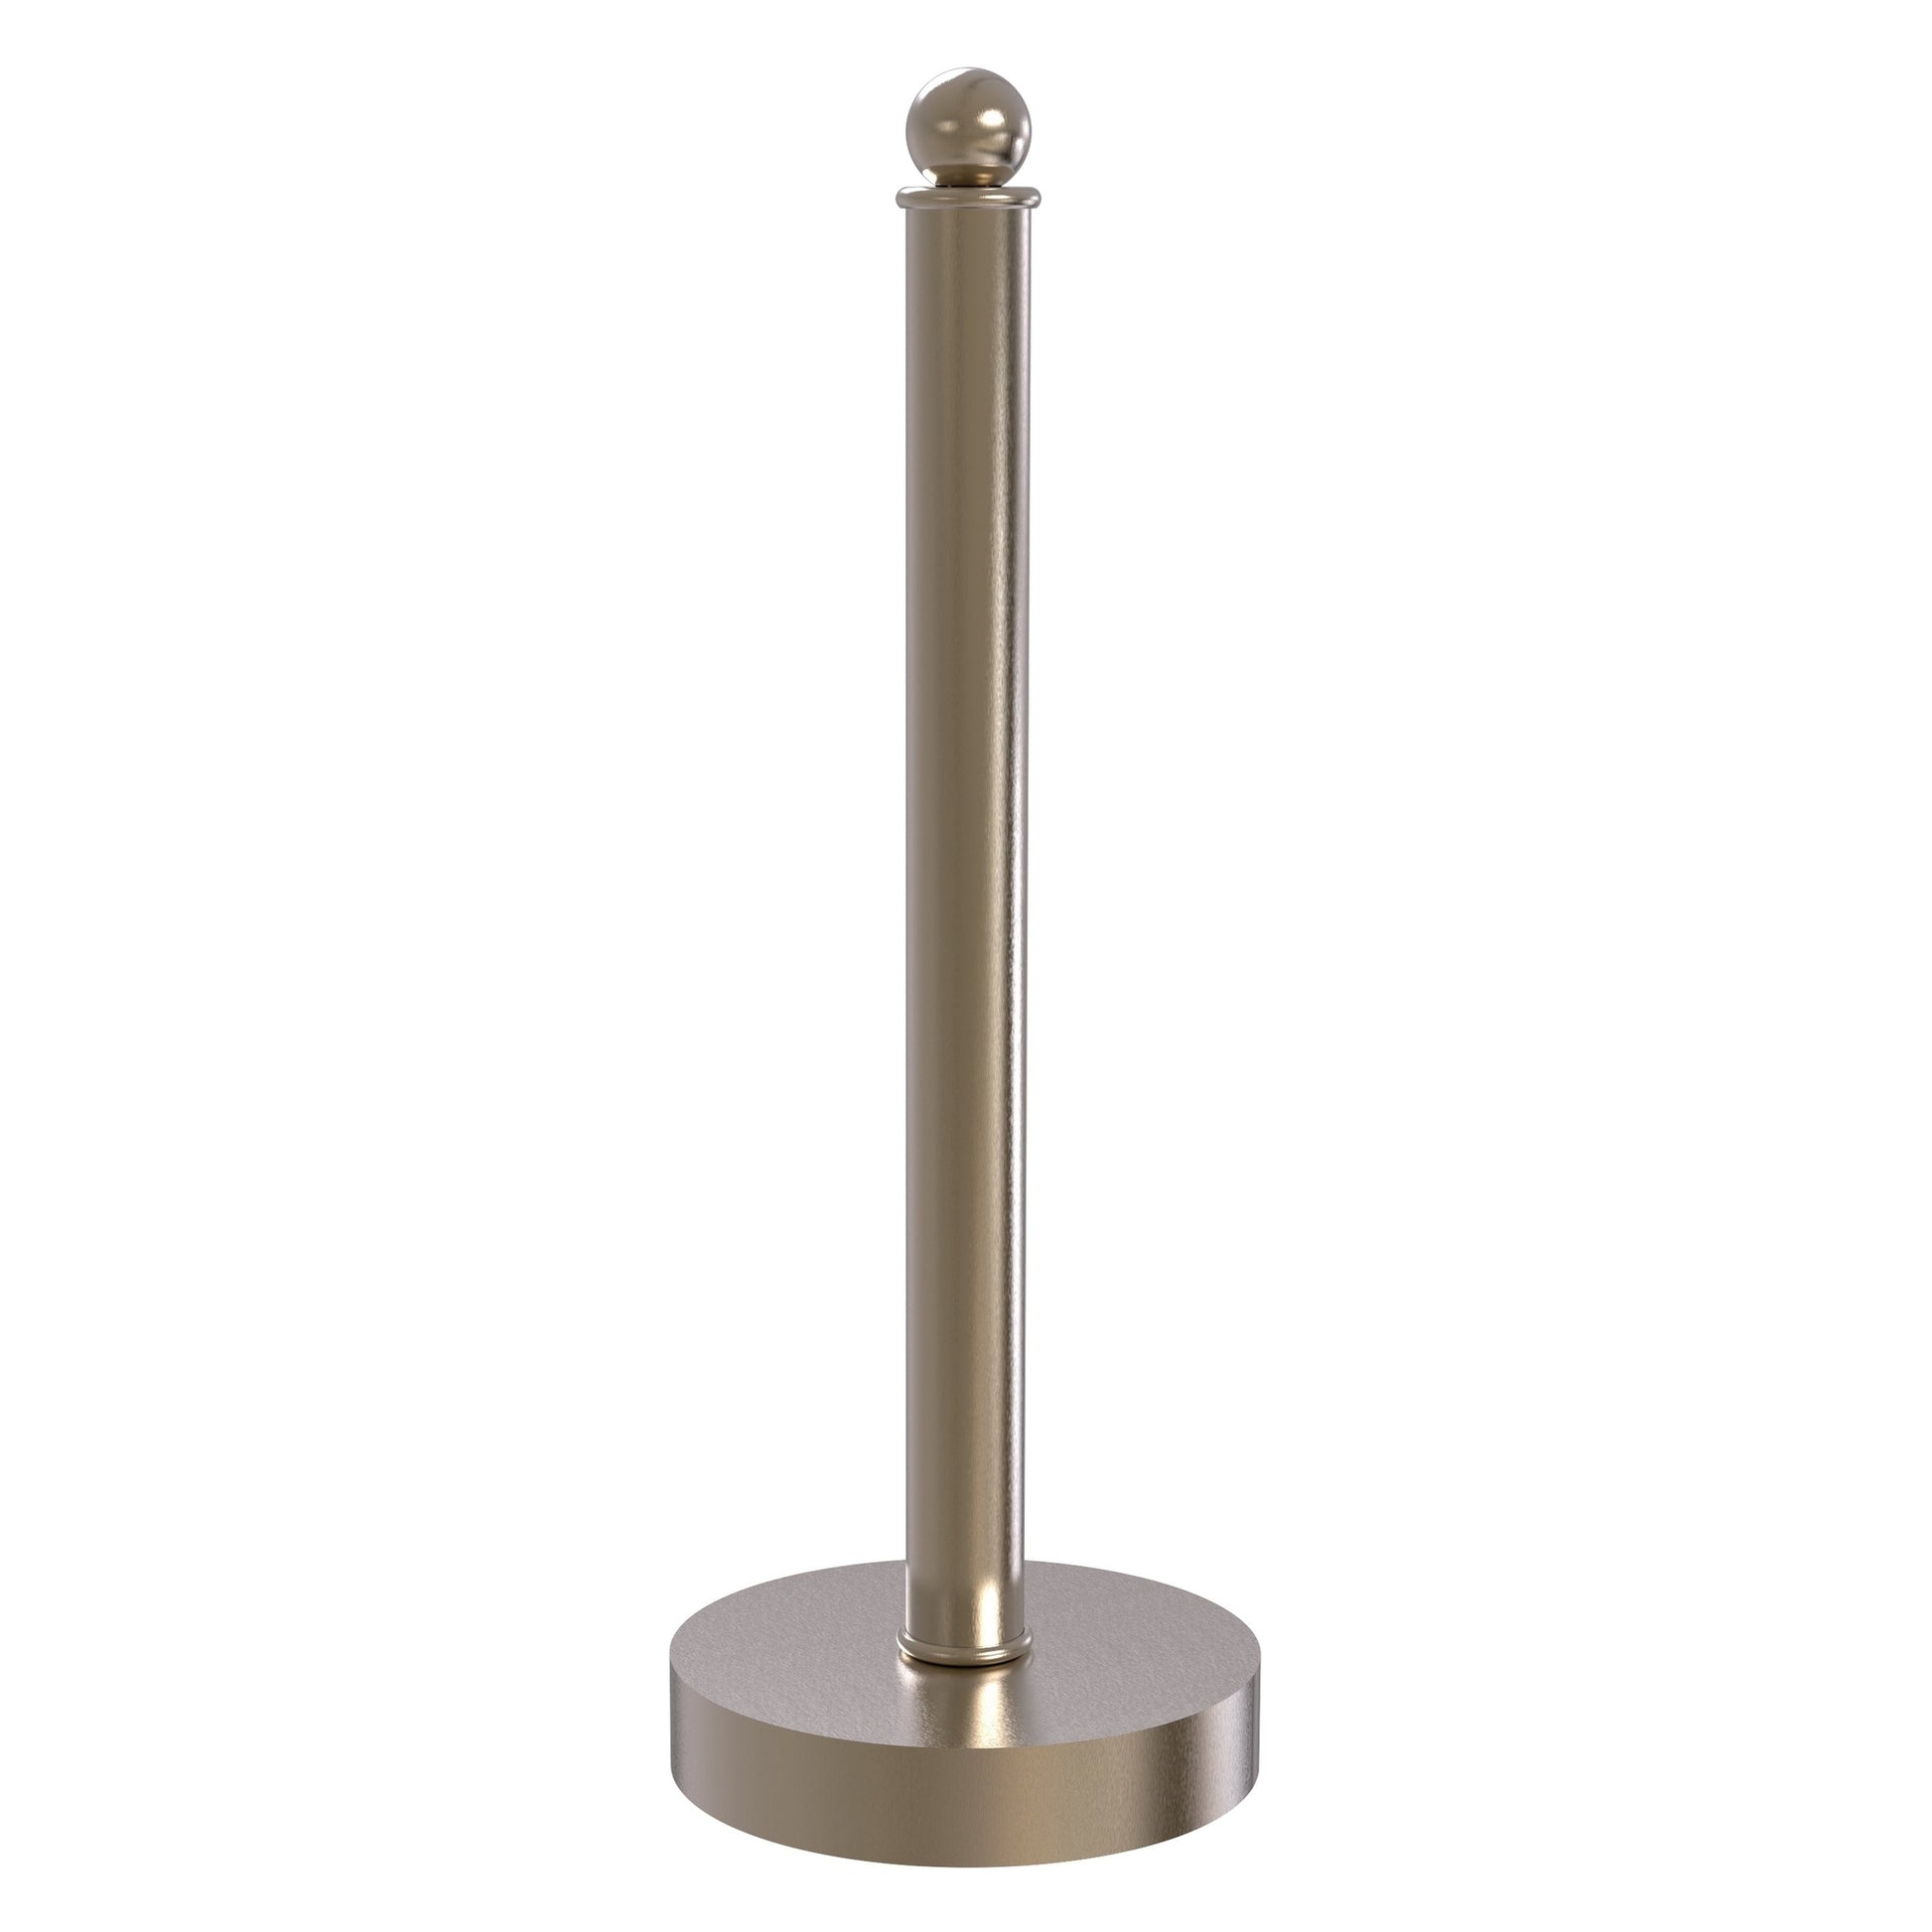 Allied Brass 1051 5" Antique Pewter Solid Brass Paper Towel Holder